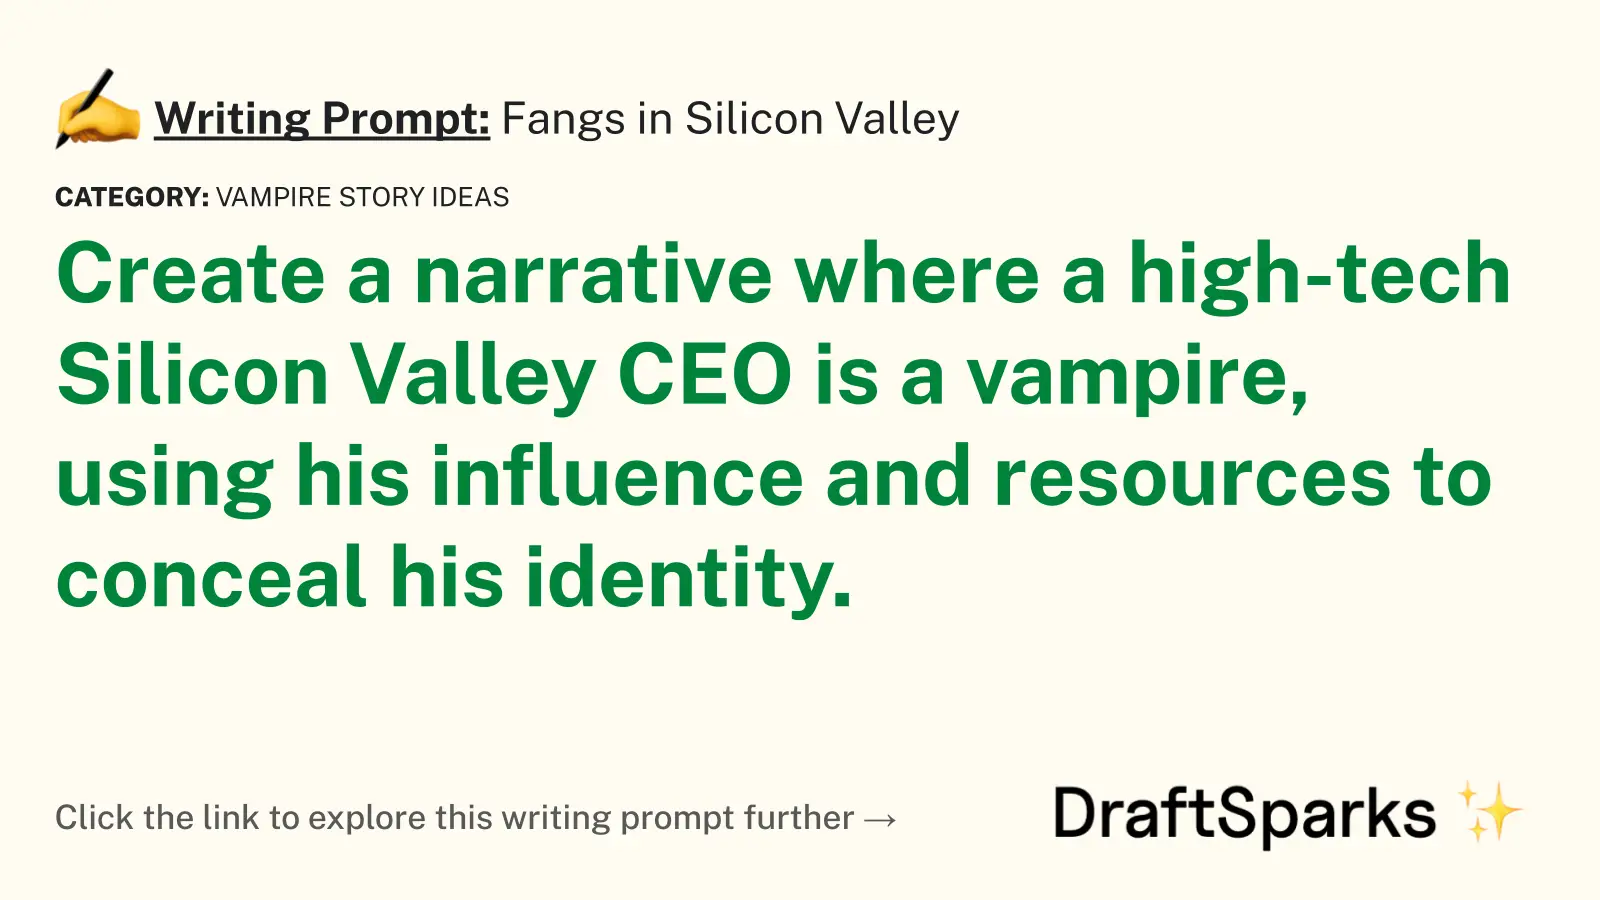 Fangs in Silicon Valley